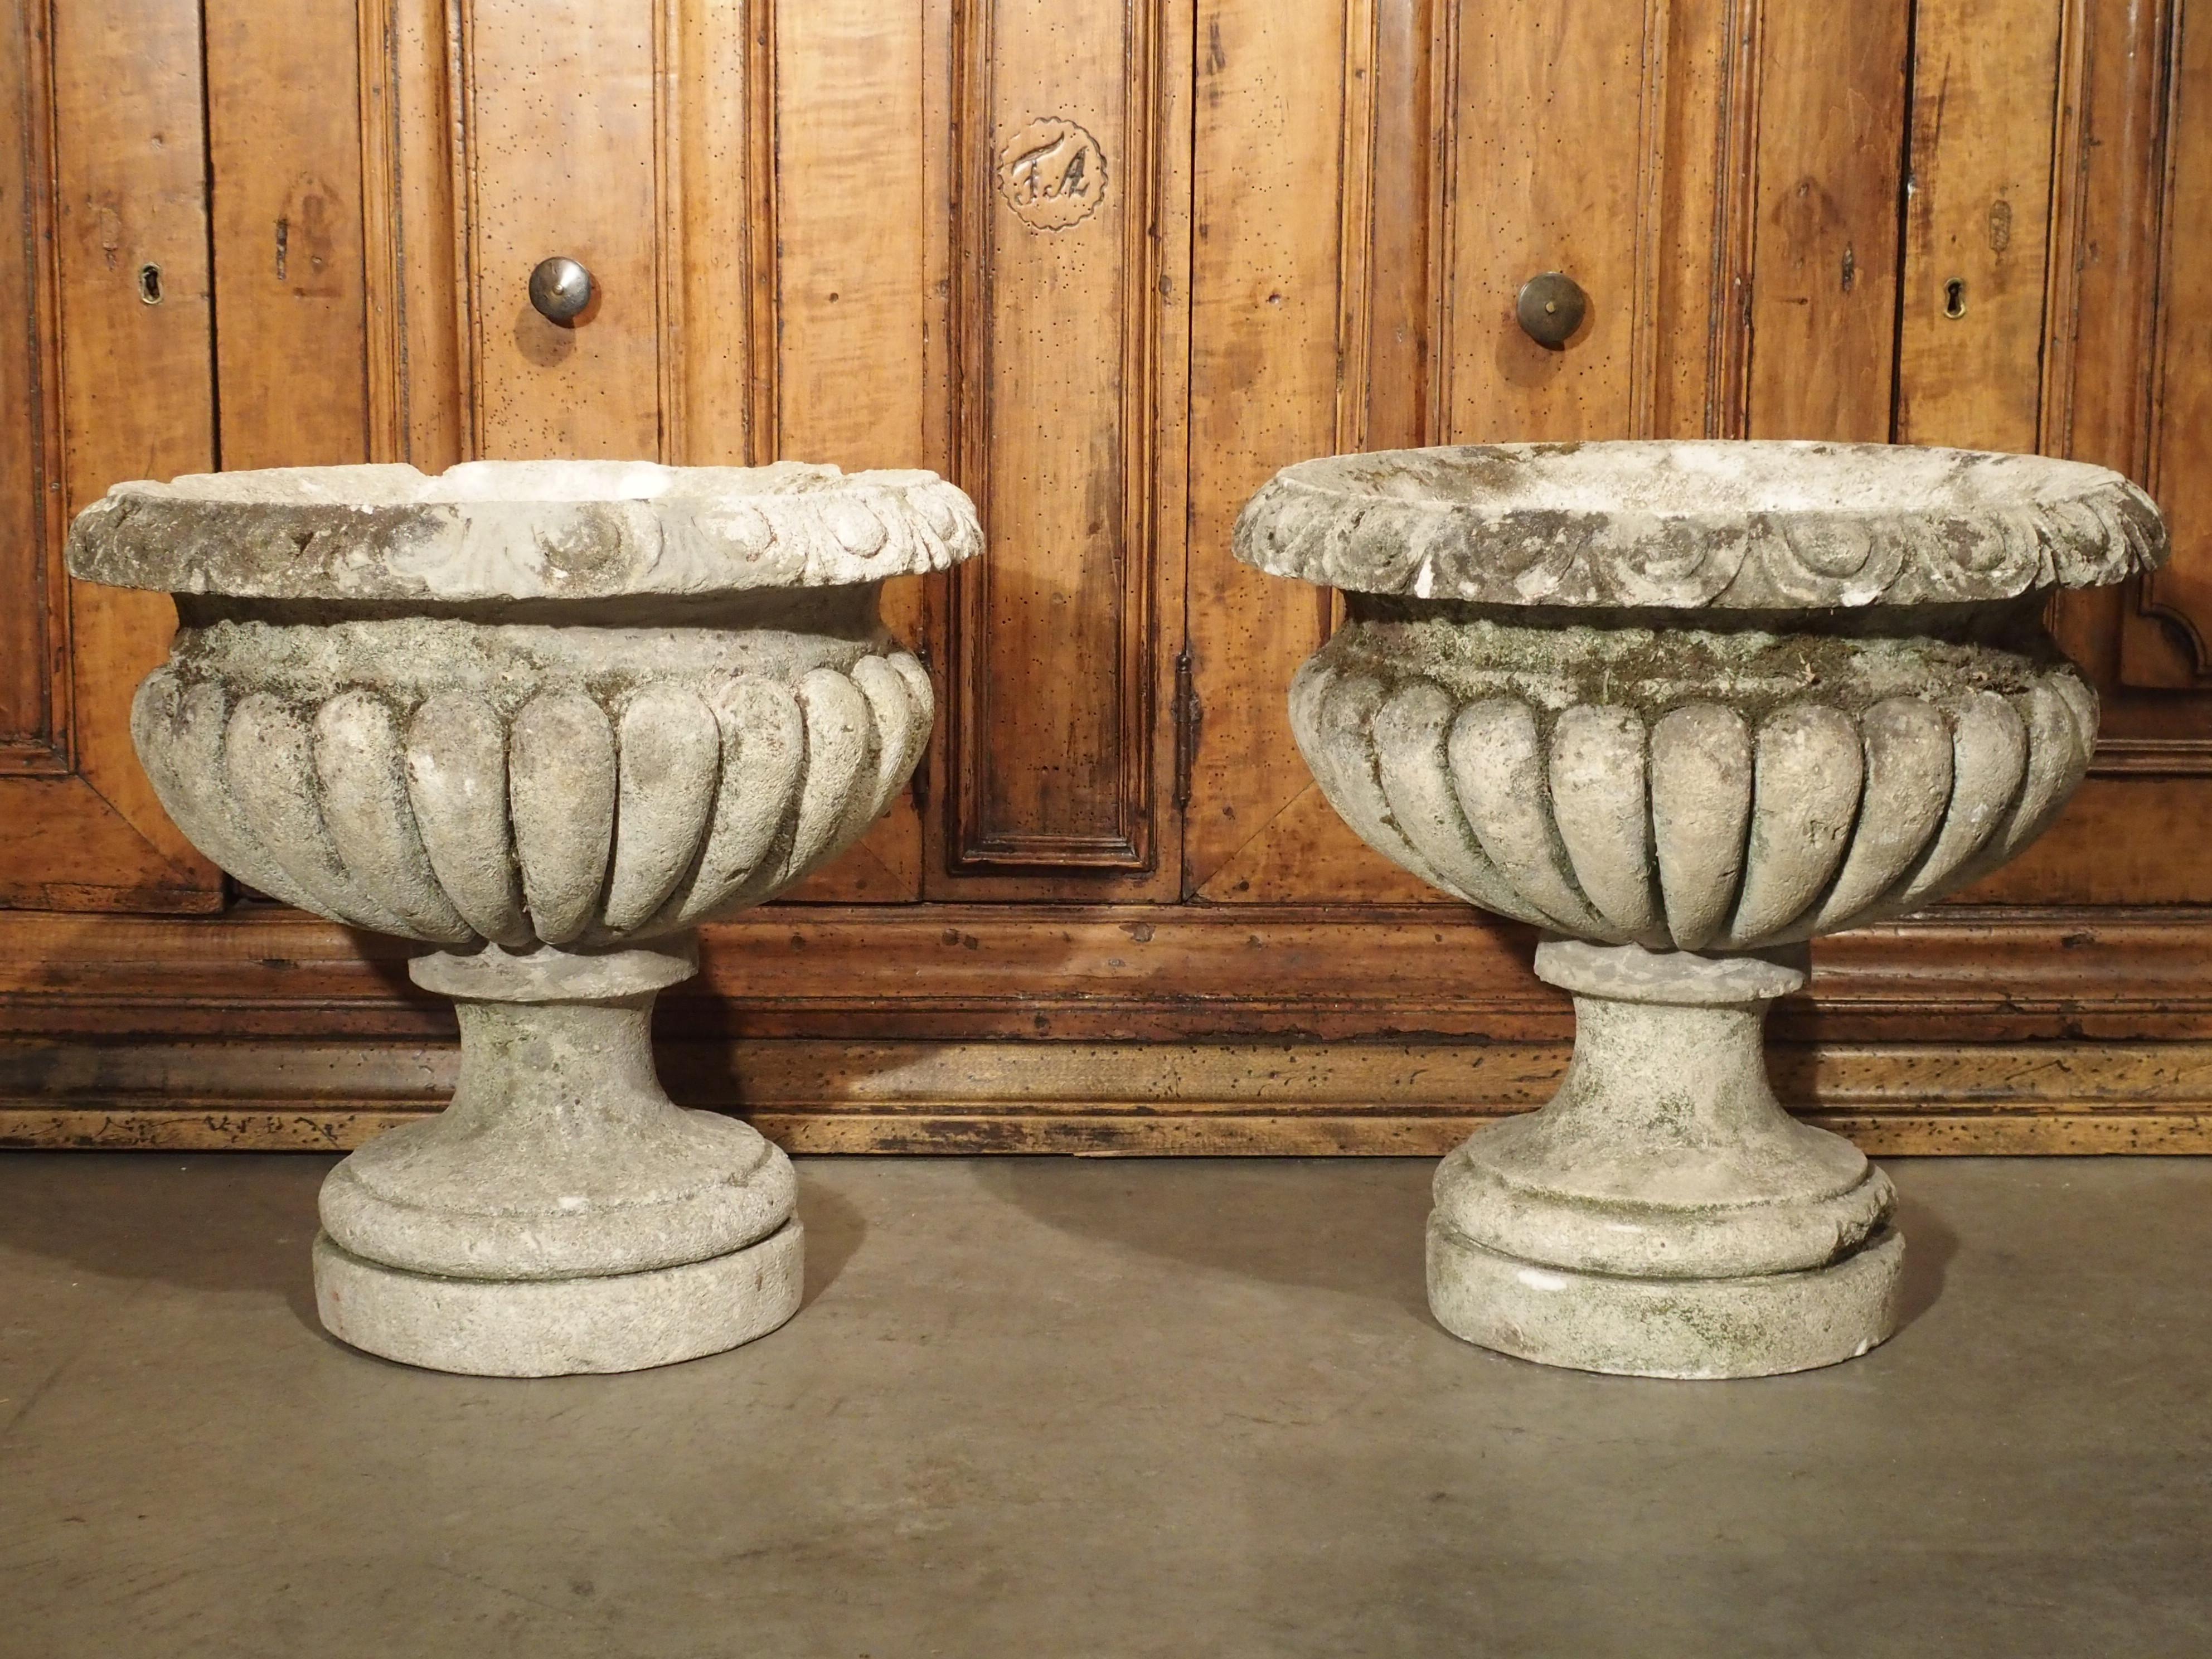 Carved Vicenza Stone Vases from Italy, circa 1900 13